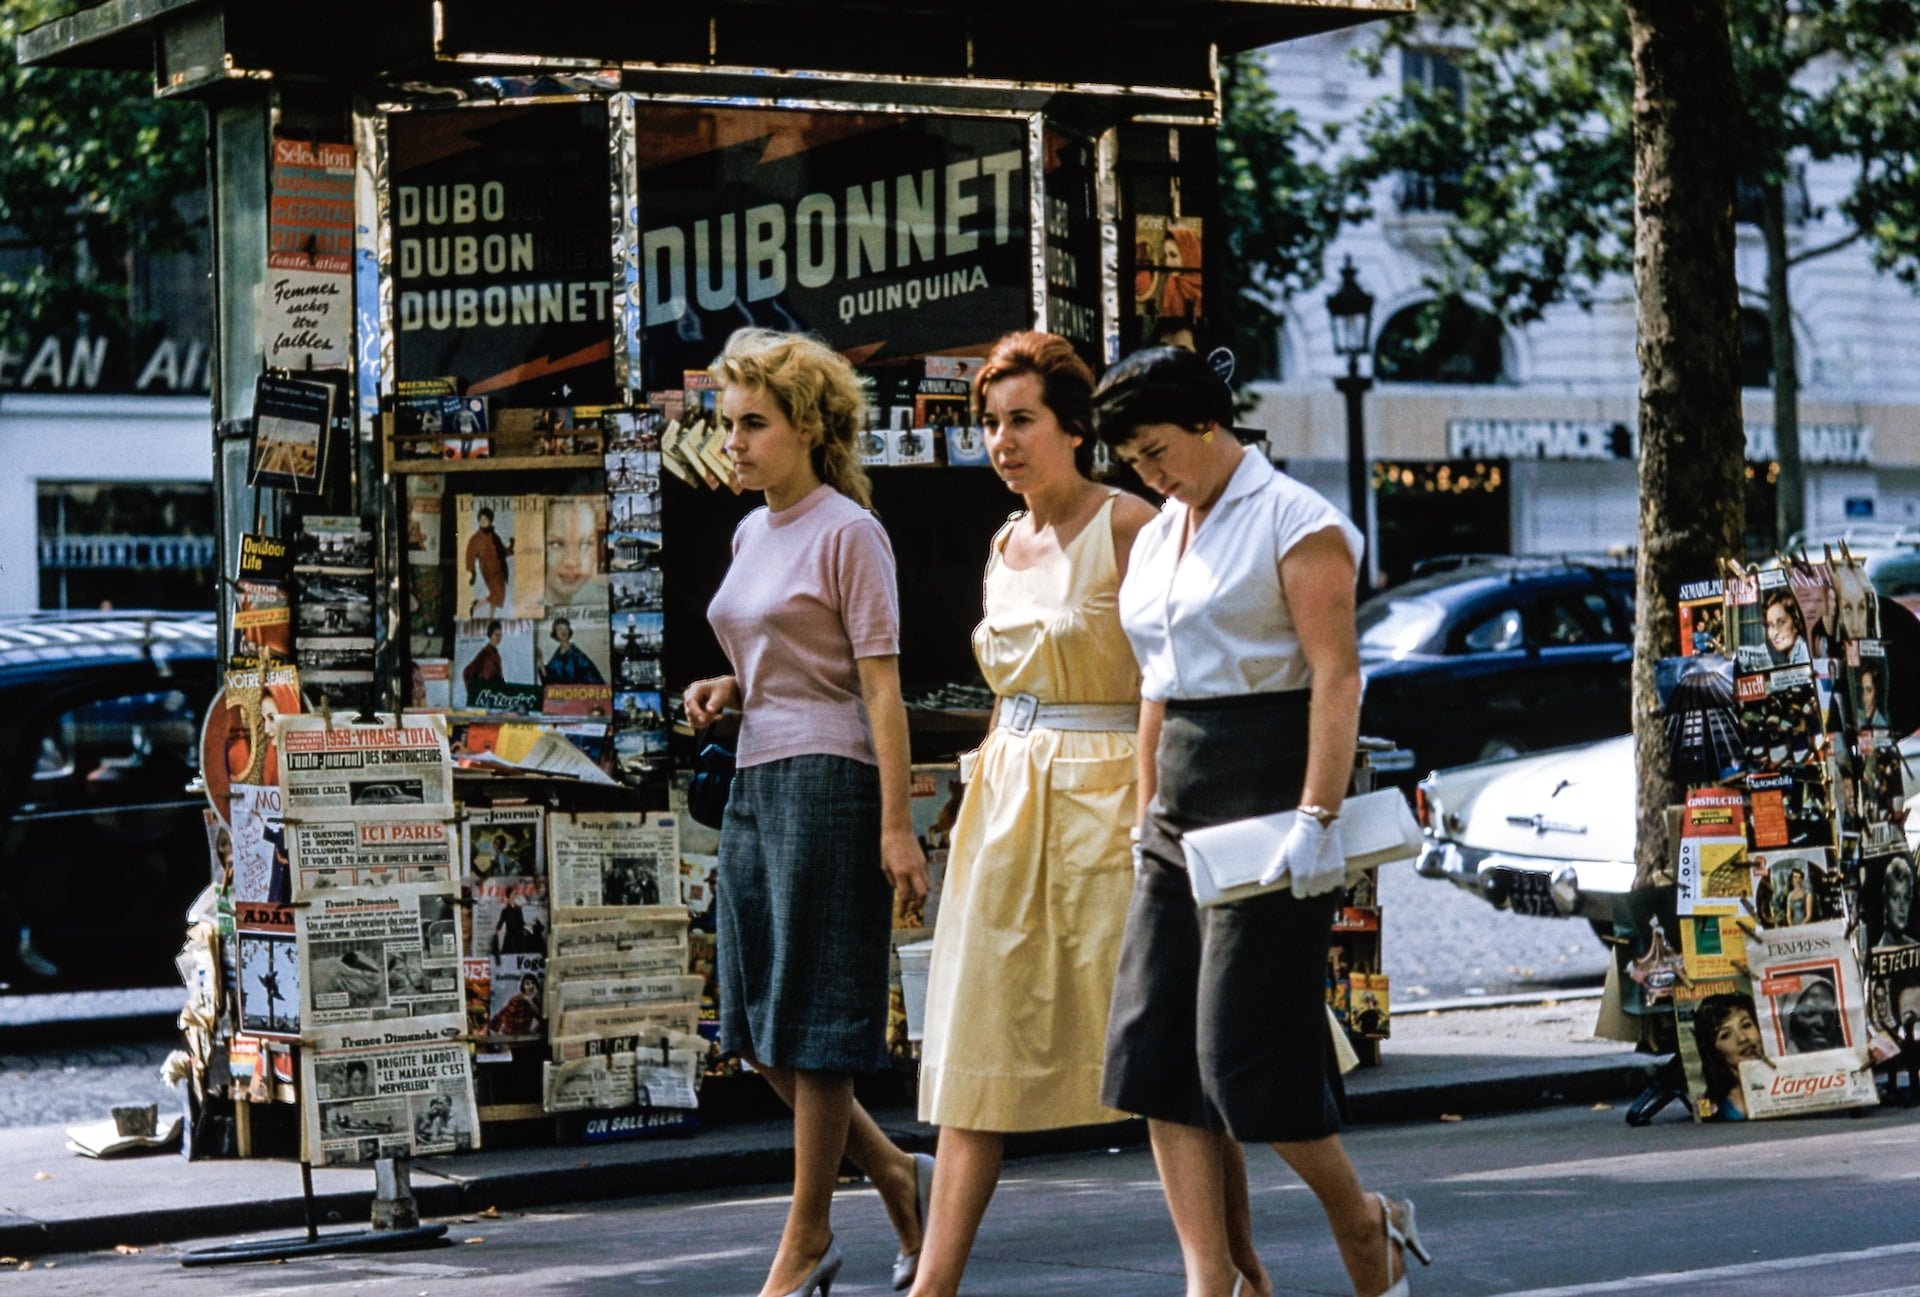 Three women walking by a news stand. Used as a cover image in an article about alternative asset investment news.